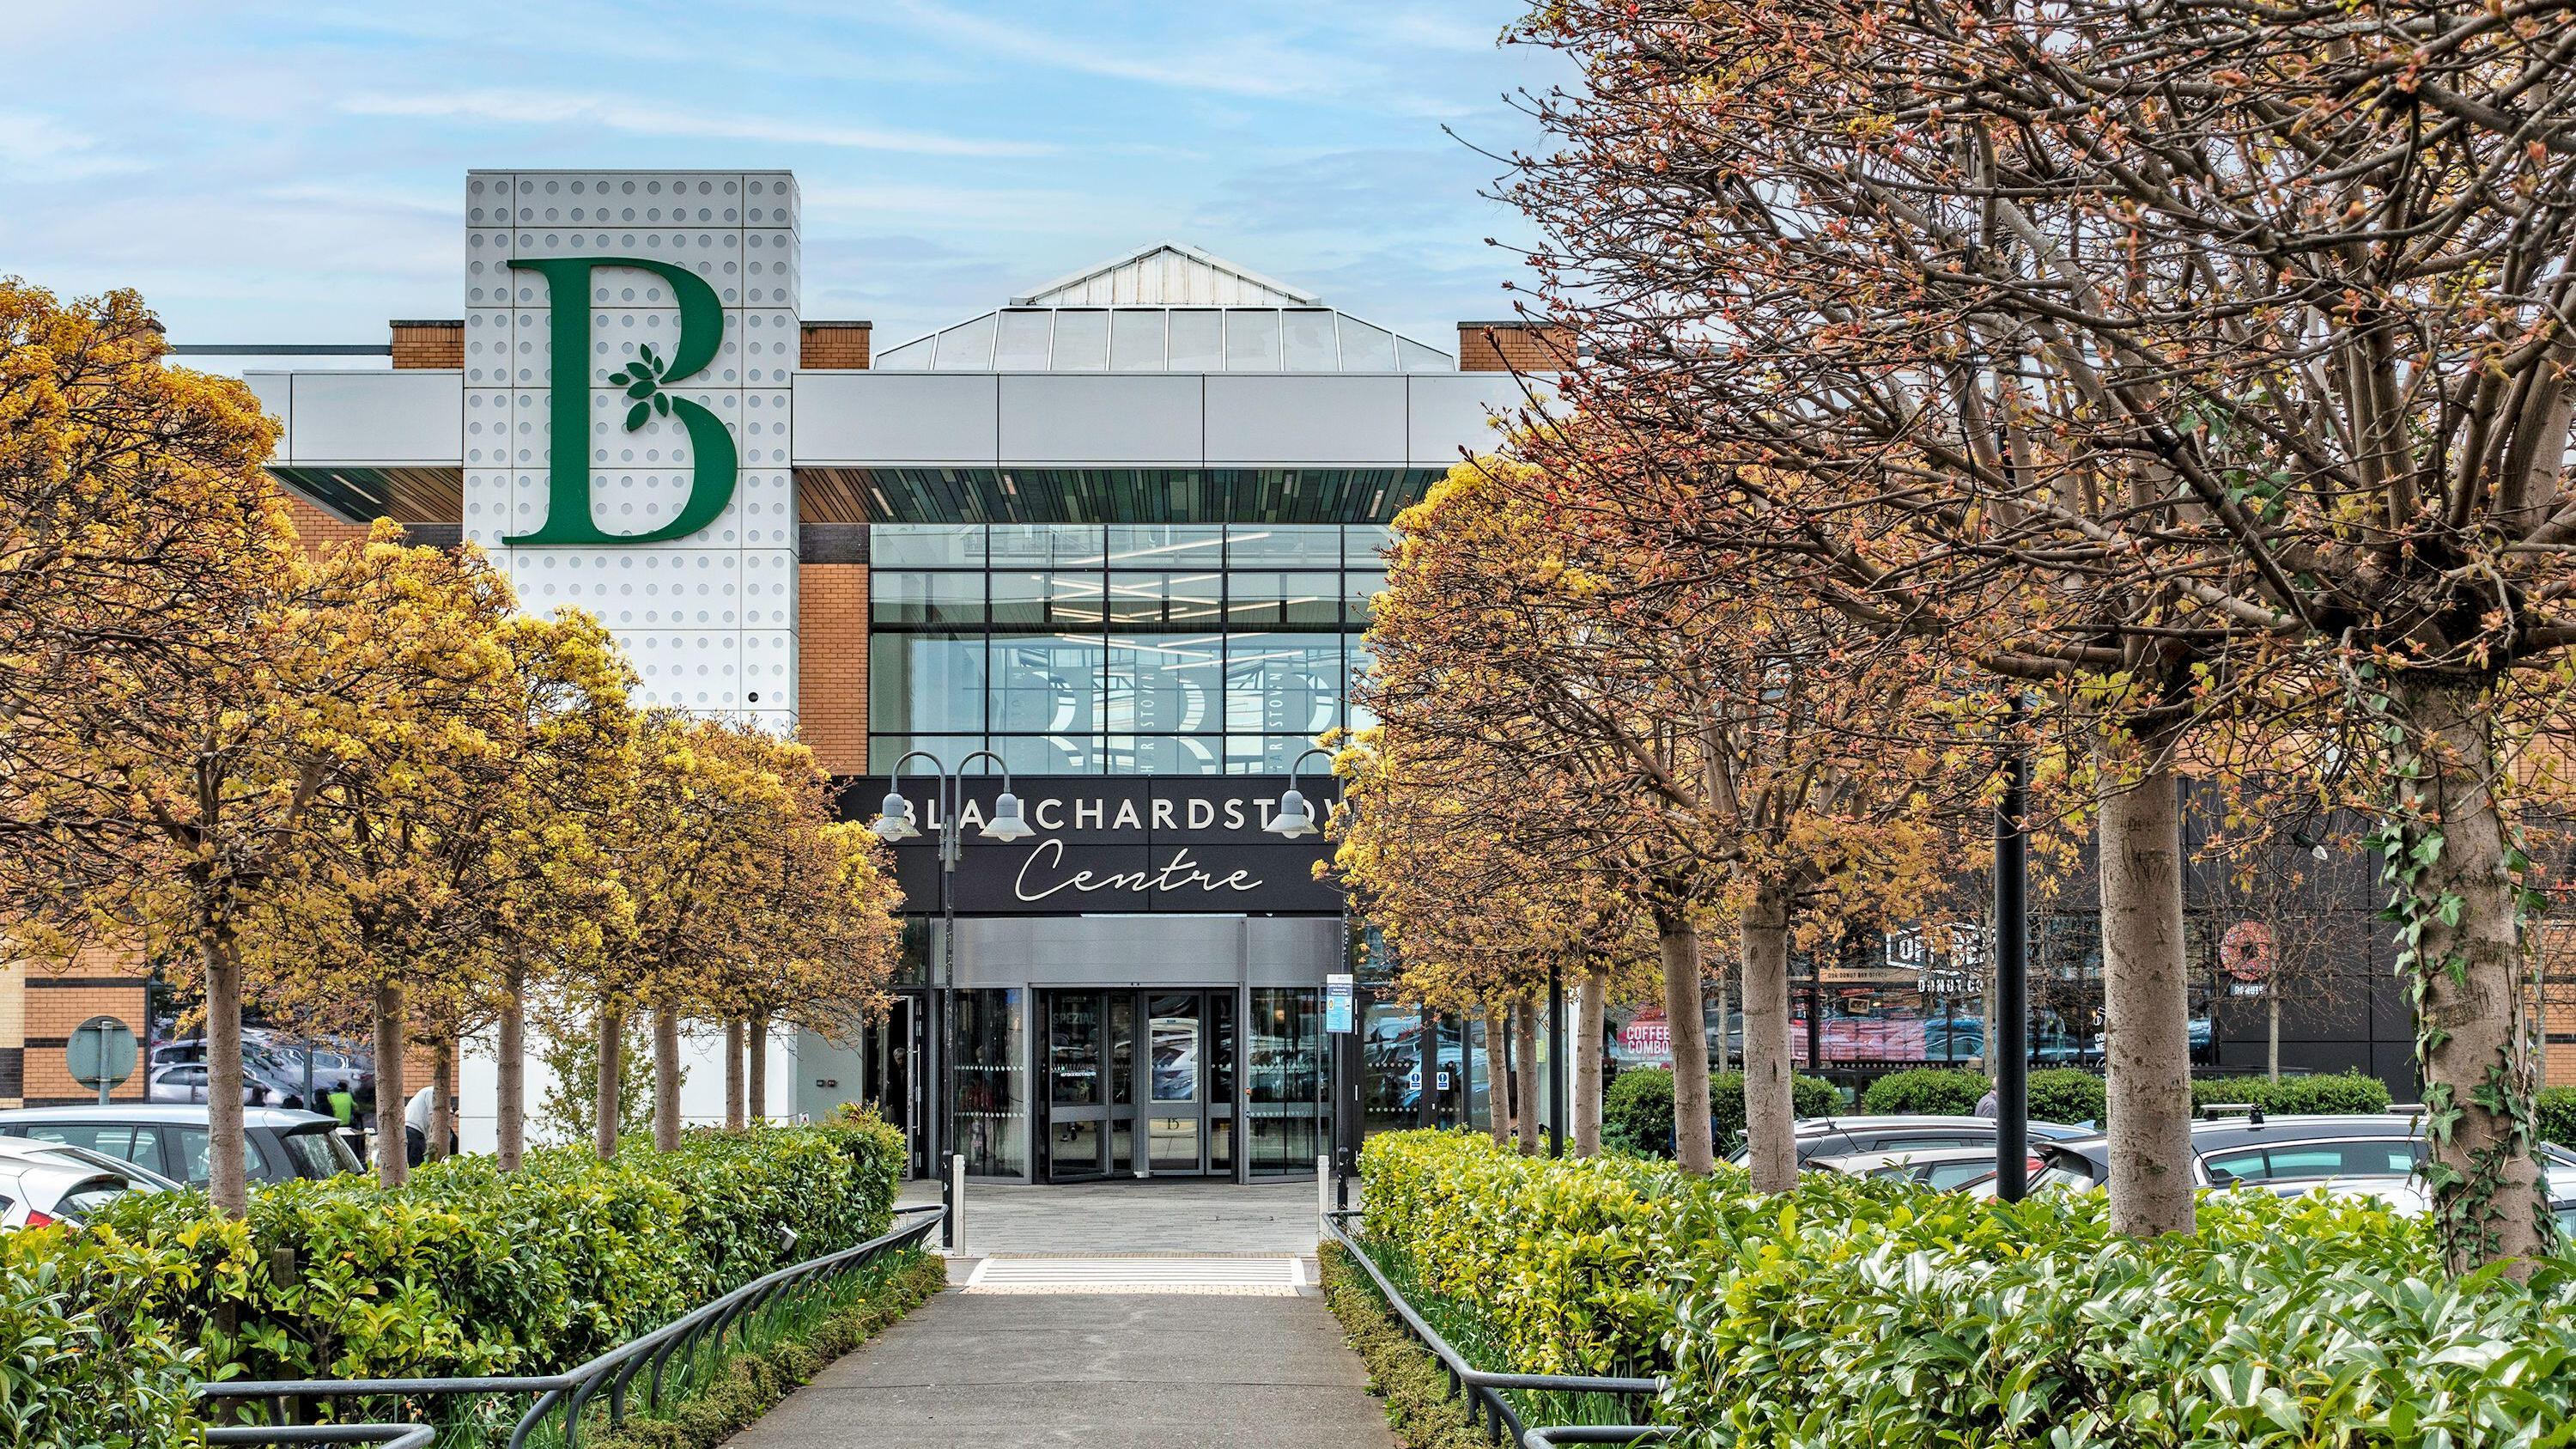 A deal for a sale of Dublin’s Blanchardstown Centre is likely to take months to complete